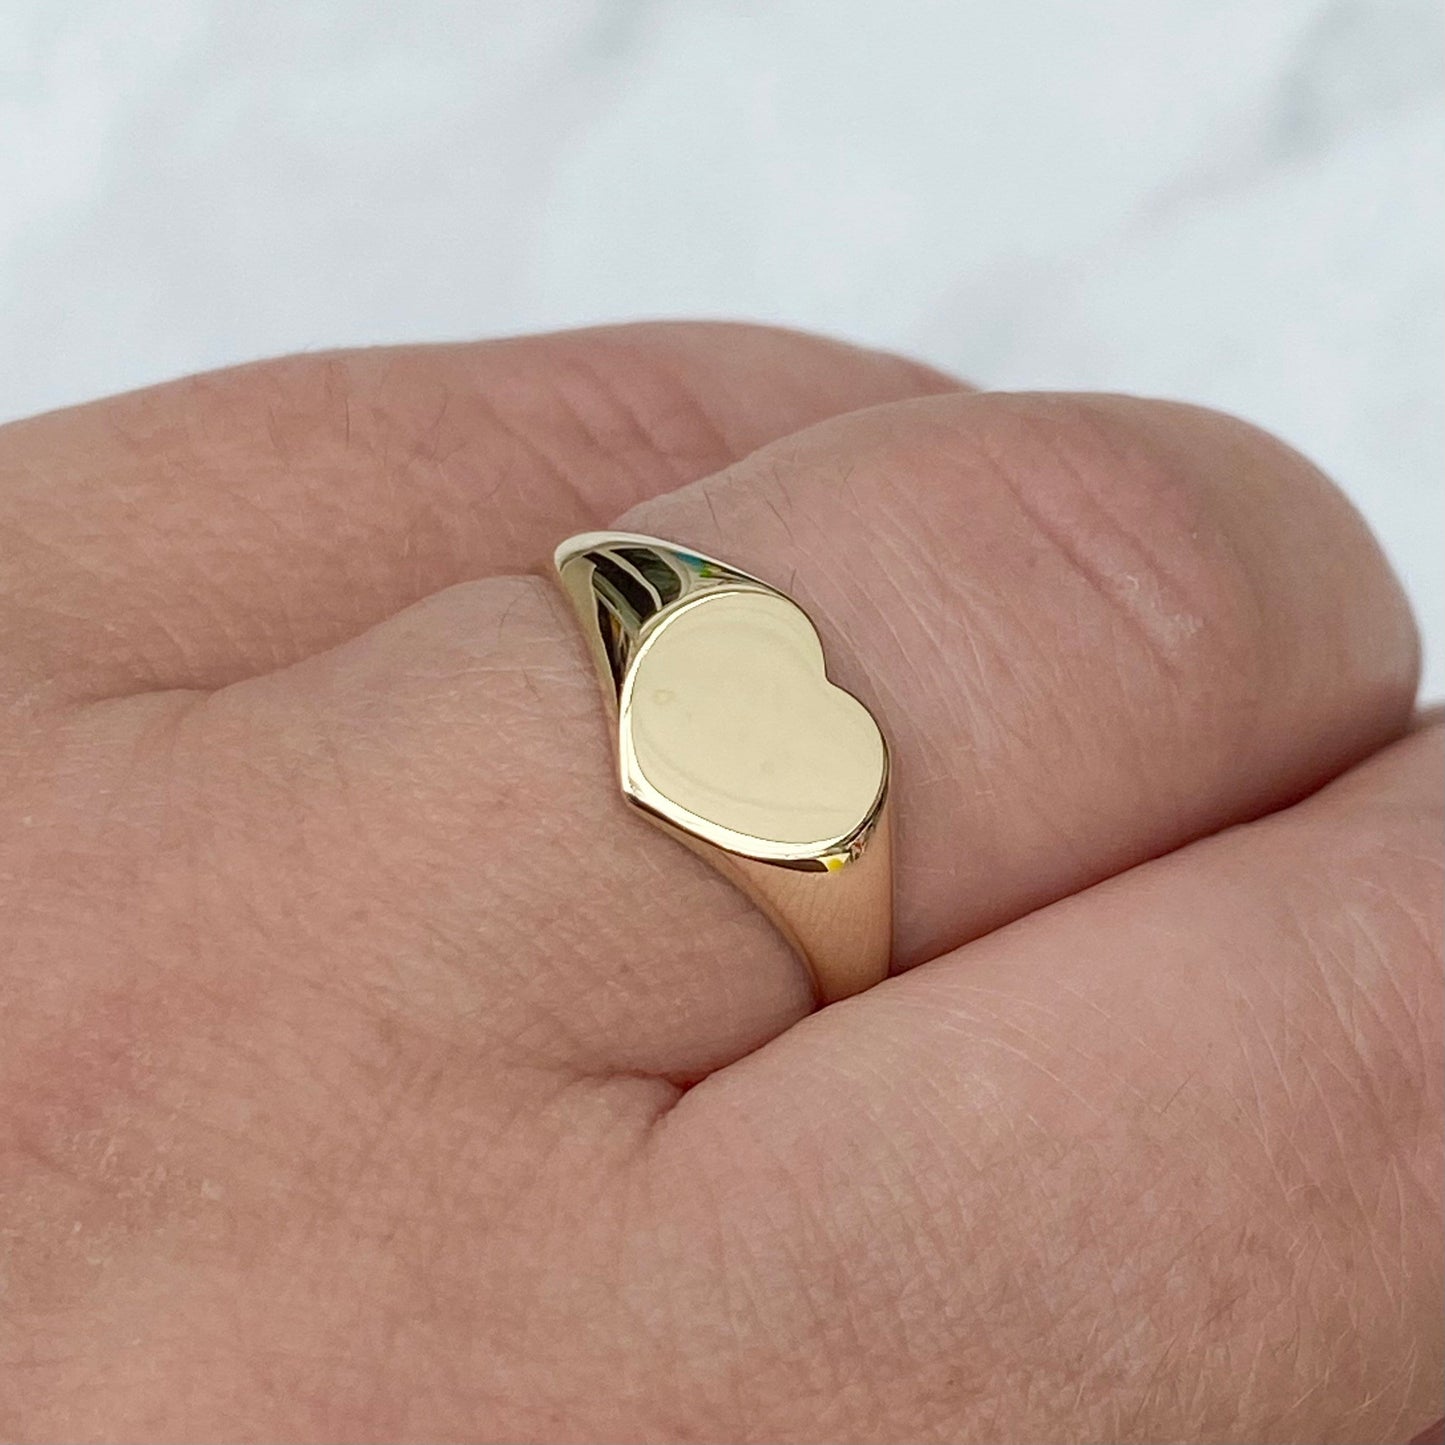 Vintage 9ct yellow gold heart signet ring - Can be hand engraved - UK size O - US size 7 - British vintage jewellery